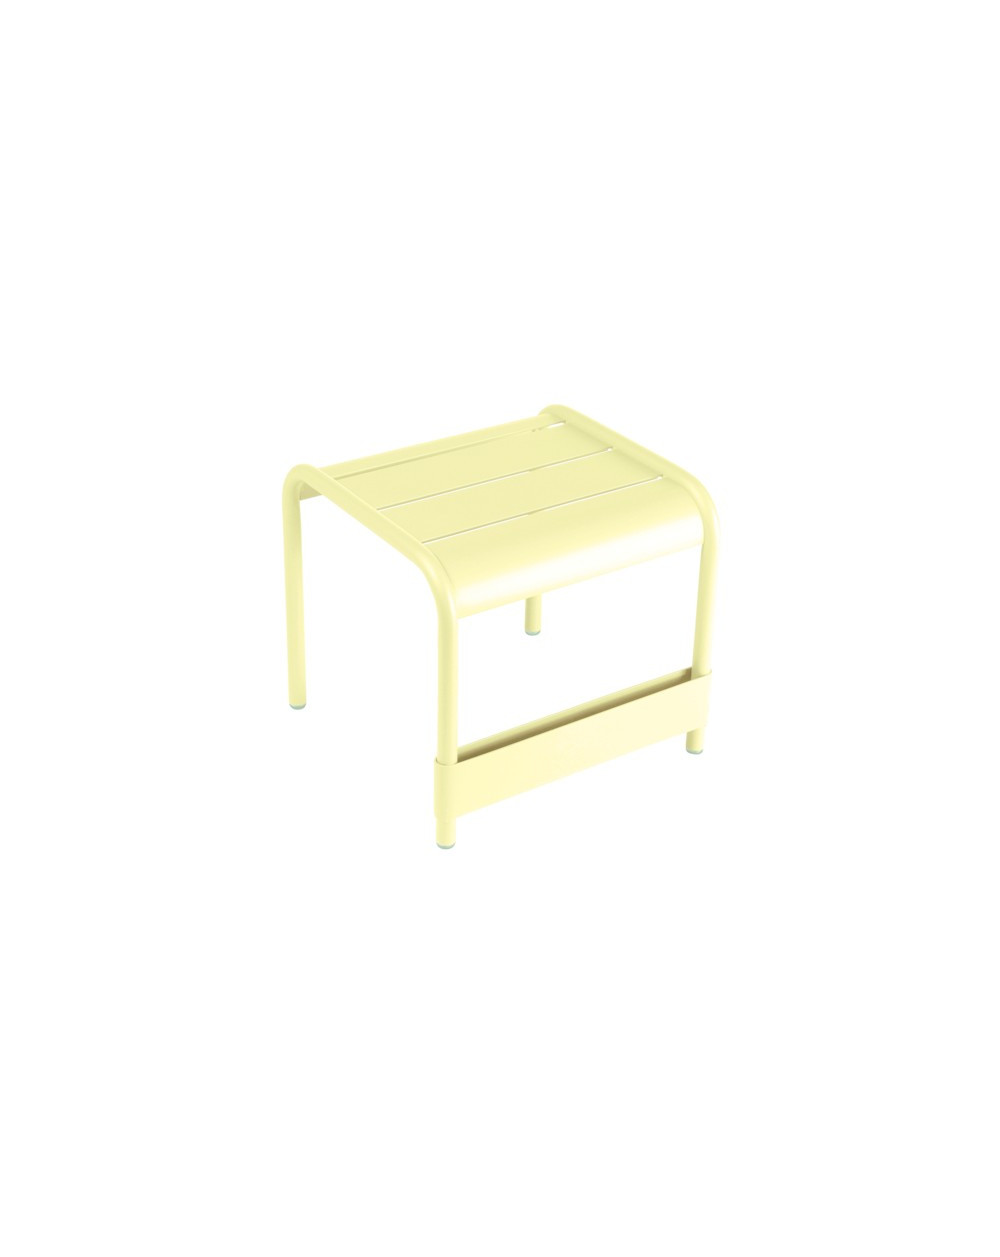 Petite table basse / Repose-pieds Luxembourg Fermob Fermob - 7